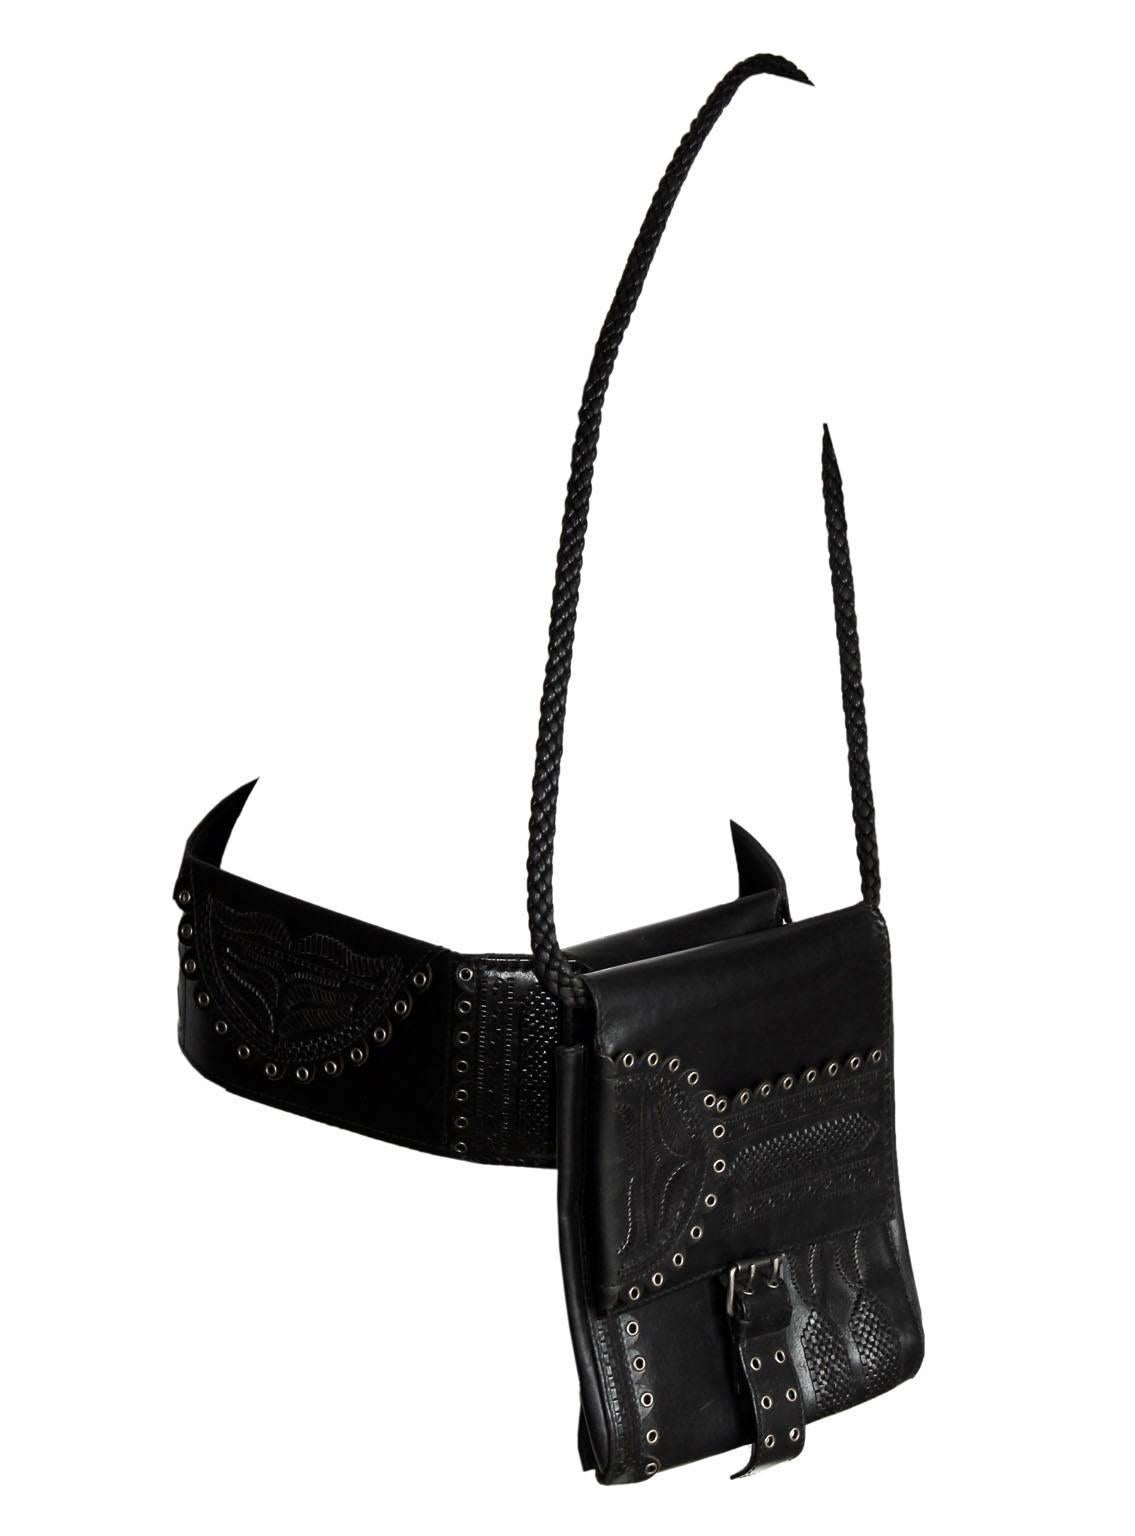 Who could ever forget that Incredible black leather runway belt from Tom Ford's dreamy fall/winter 2001 show for Yves Saint Laurent Rive Gauche? This absolute Tom Ford masterpiece is simply amazing & is a must for every Ford lover or